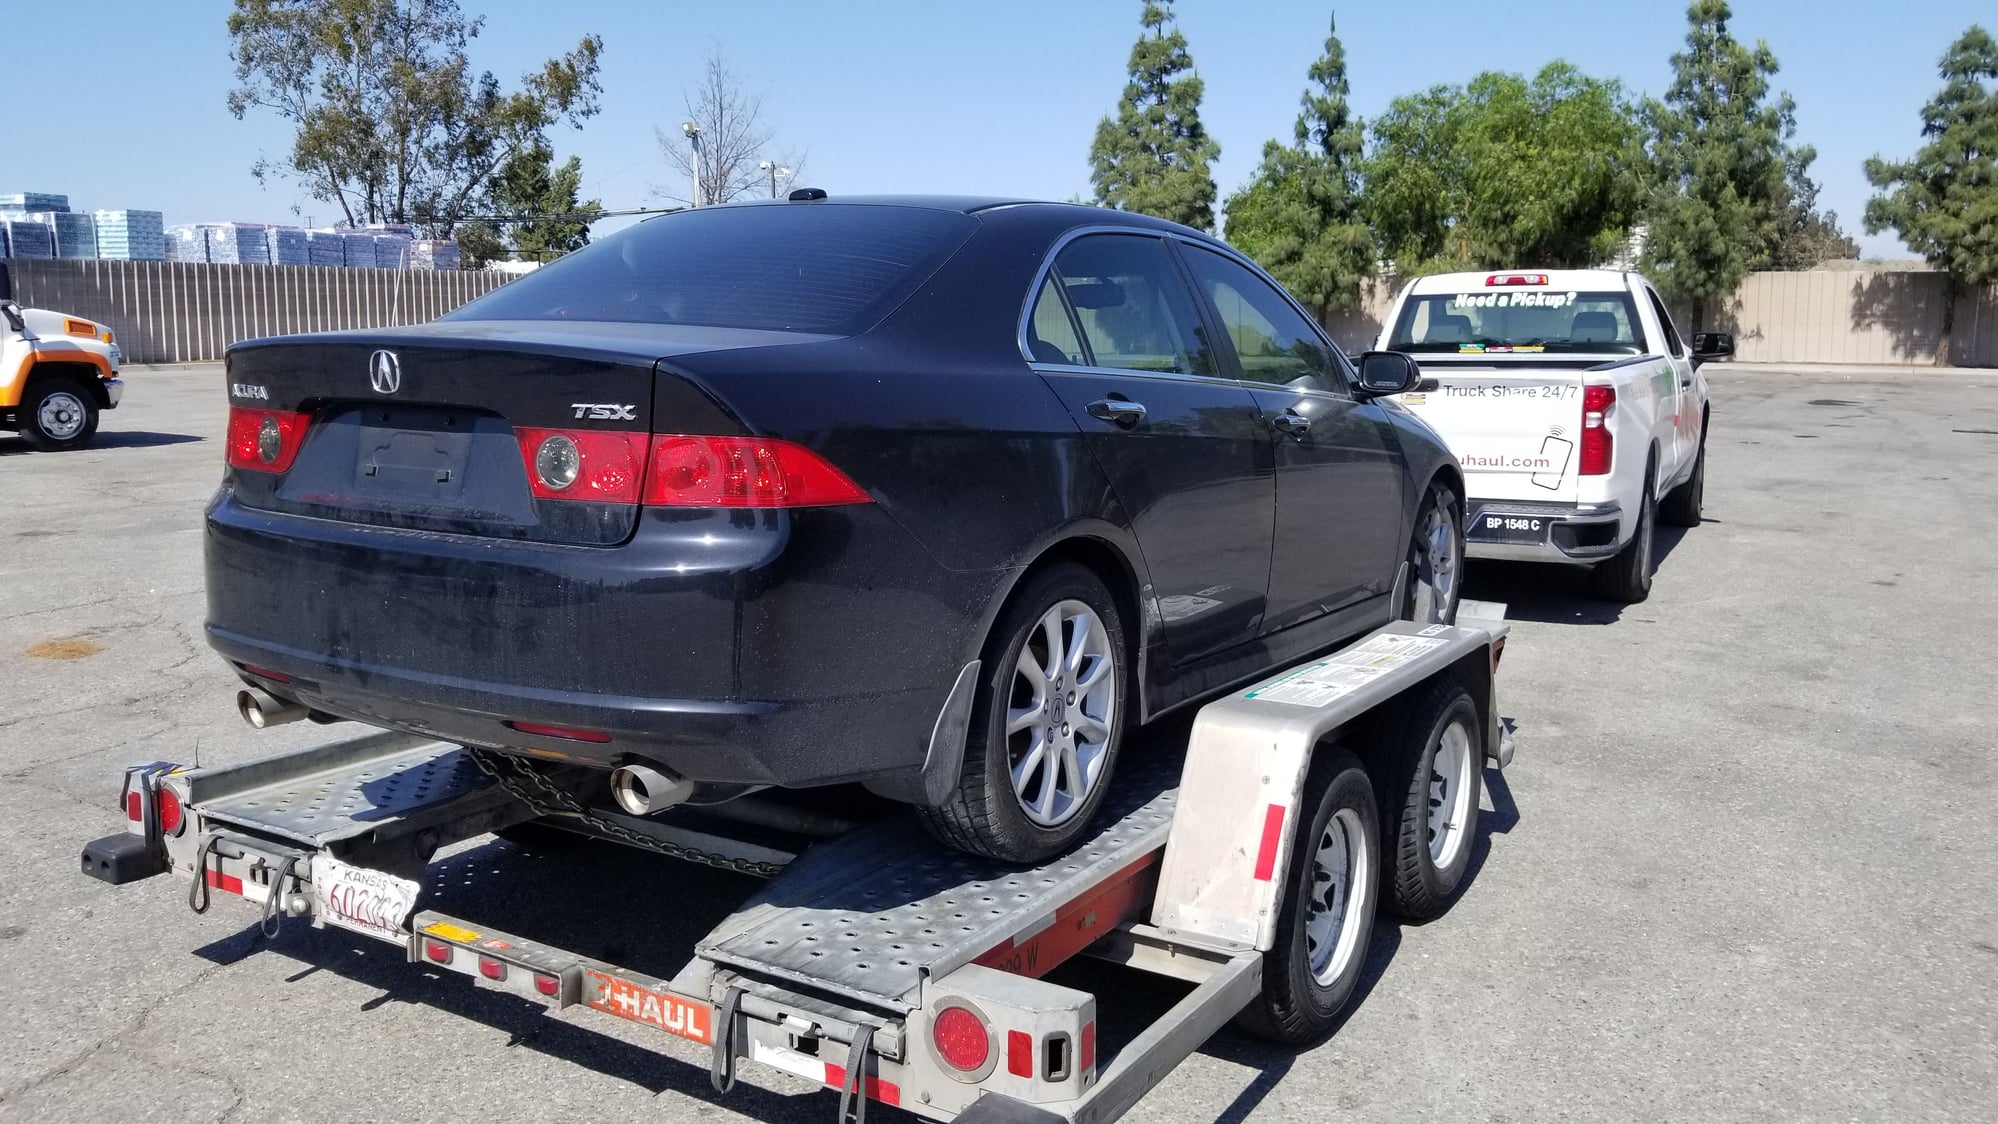 2008 Acura TSX - CLOSED: 2008 Acura TSX PART OUT!! - Ontario, CA 91762, United States